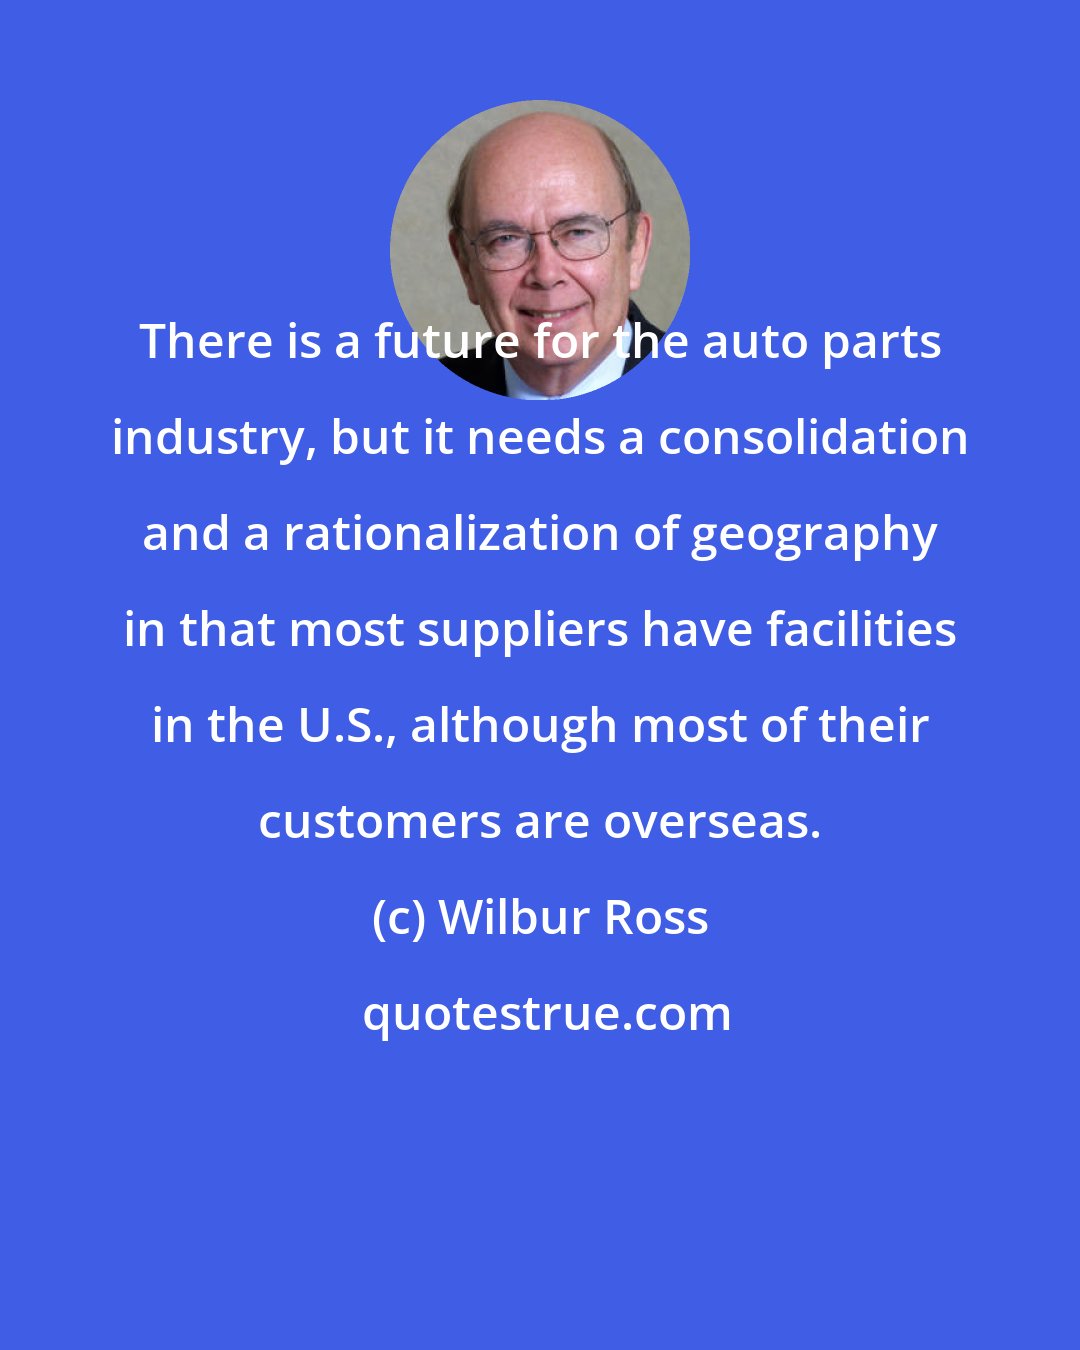 Wilbur Ross: There is a future for the auto parts industry, but it needs a consolidation and a rationalization of geography in that most suppliers have facilities in the U.S., although most of their customers are overseas.